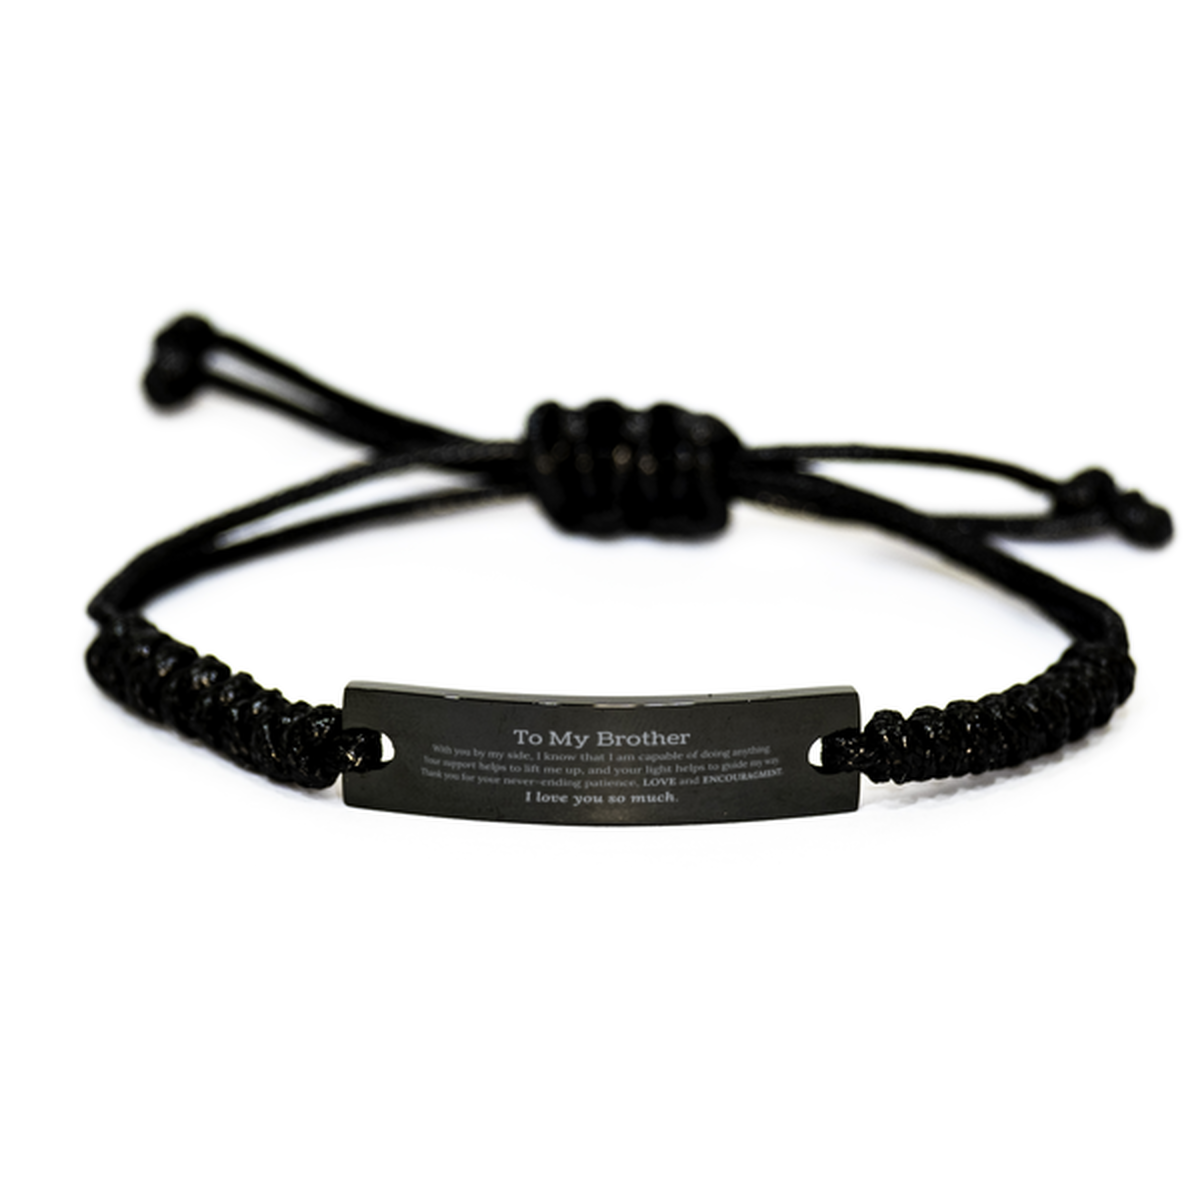 Appreciation Brother Black Rope Bracelet Gifts, To My Brother Birthday Christmas Wedding Keepsake Gifts for Brother With you by my side, I know that I am capable of doing anything. I love you so much